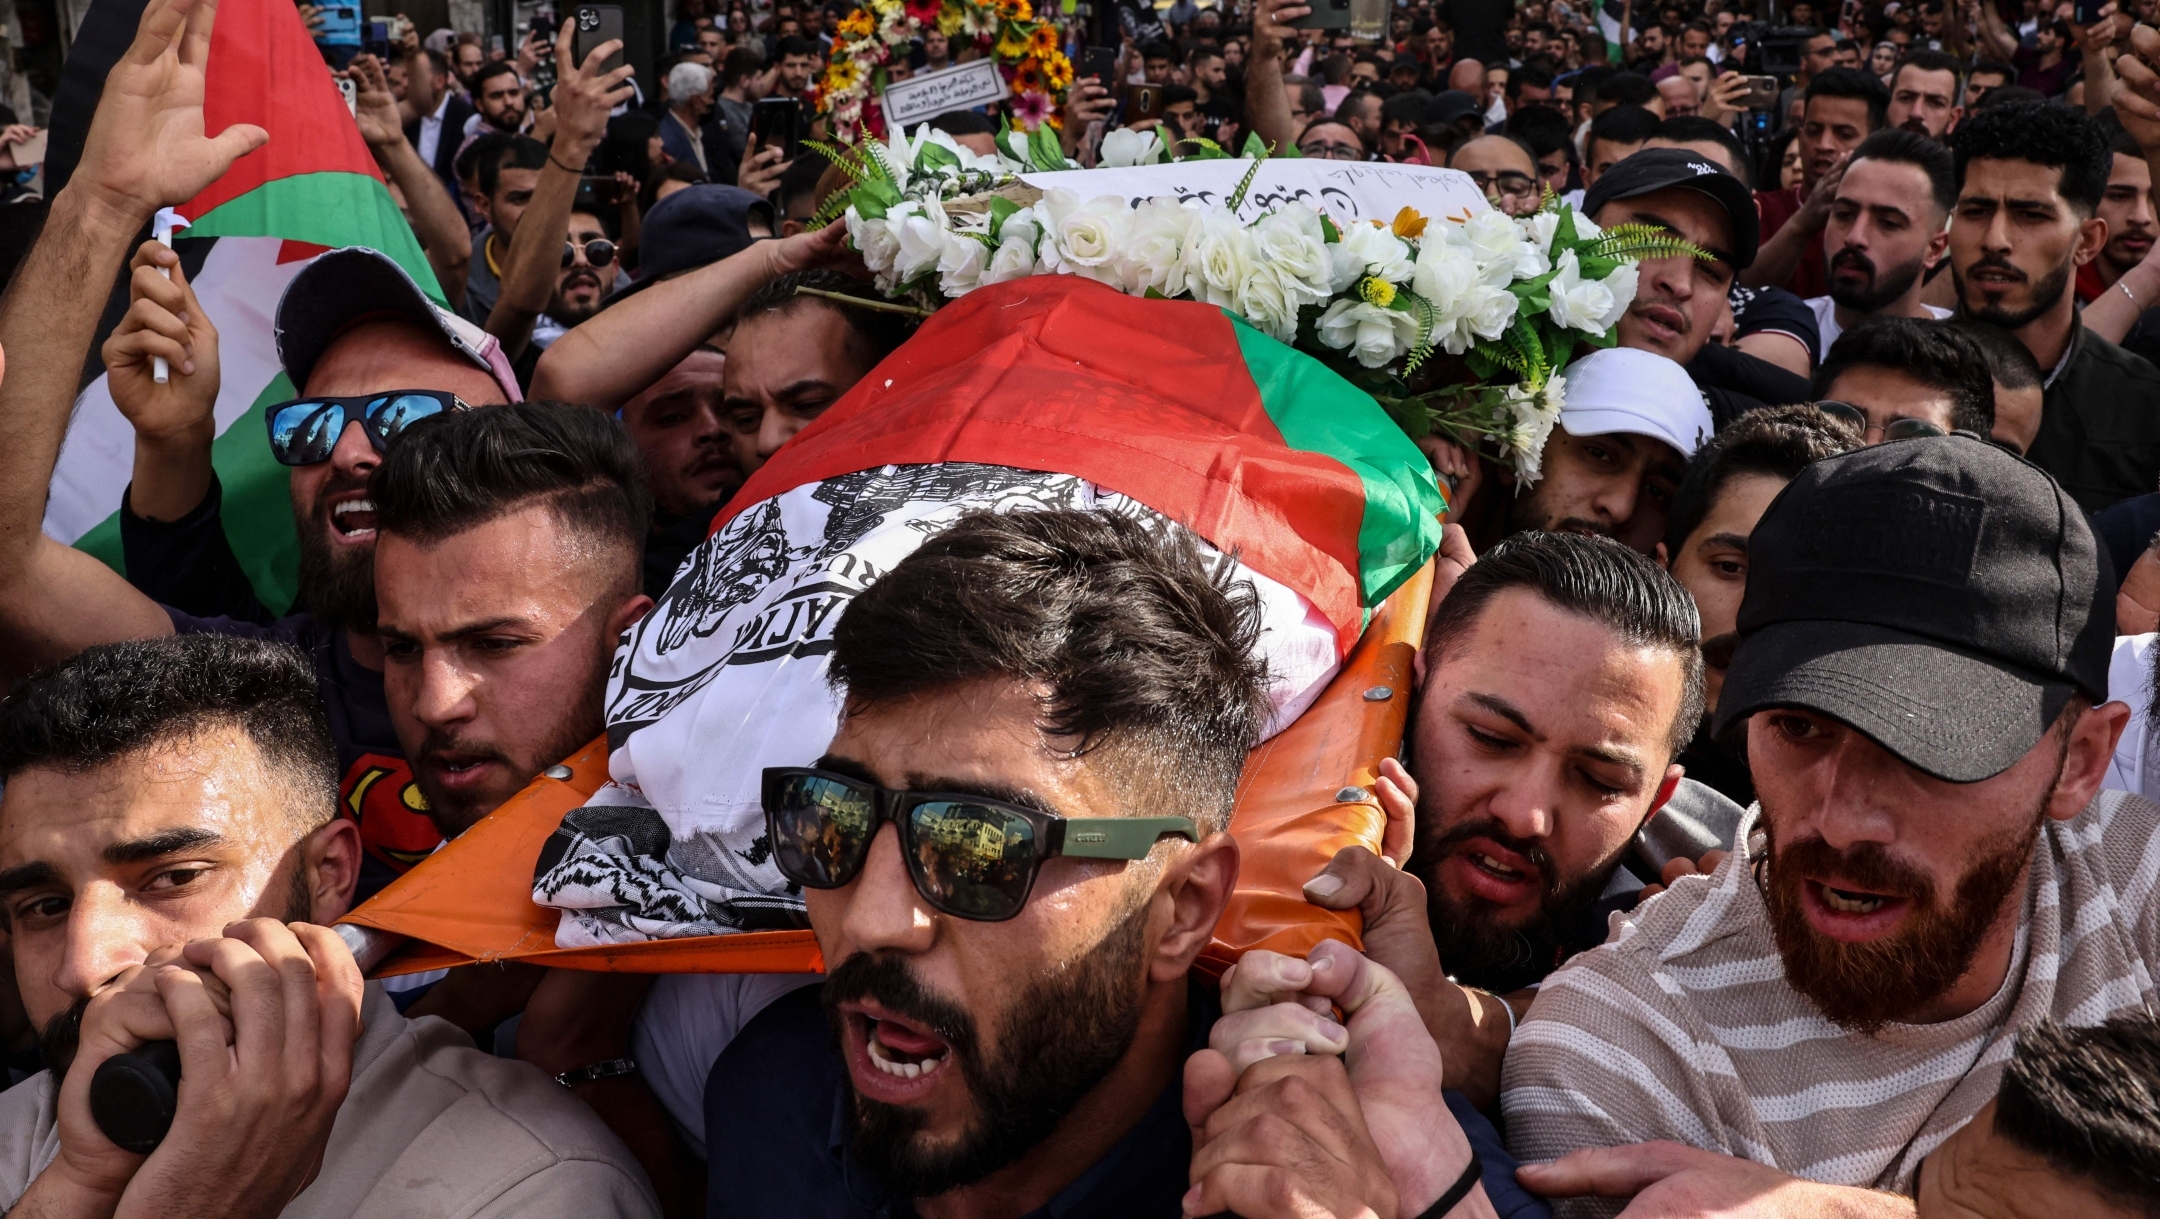 Palestinians carry the flag-draped body of veteran Al-Jazeera journalist Shireen Abu Akleh as it is carried toward the offices of the news channel in the West Bank city of Ramallah, May 11, 2022. (Ronaldo Schemidt/AFP via Getty Images)